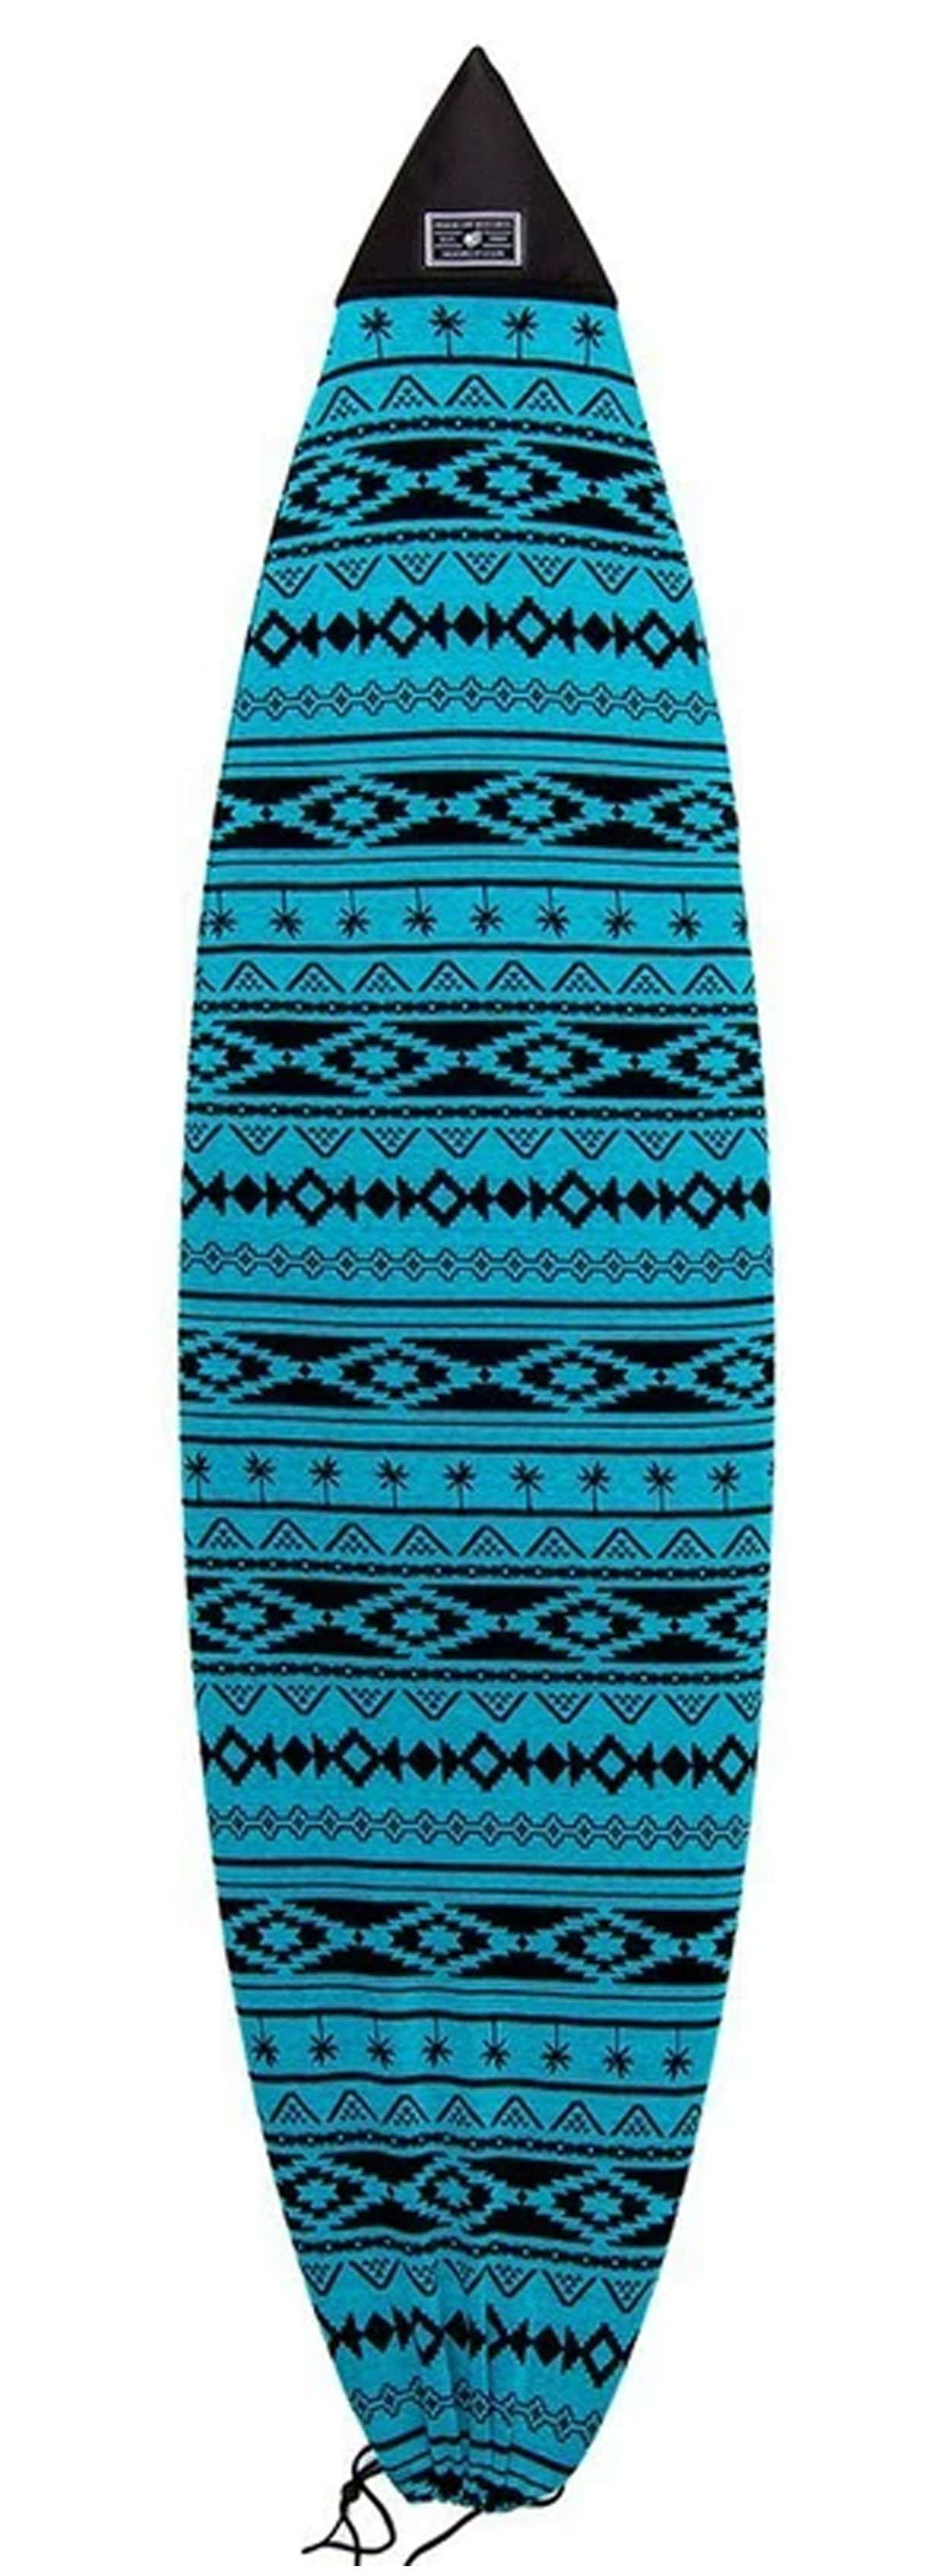 Creatures of Leisure Bodyboard Navajo Stretch Cover Cyan Navy 